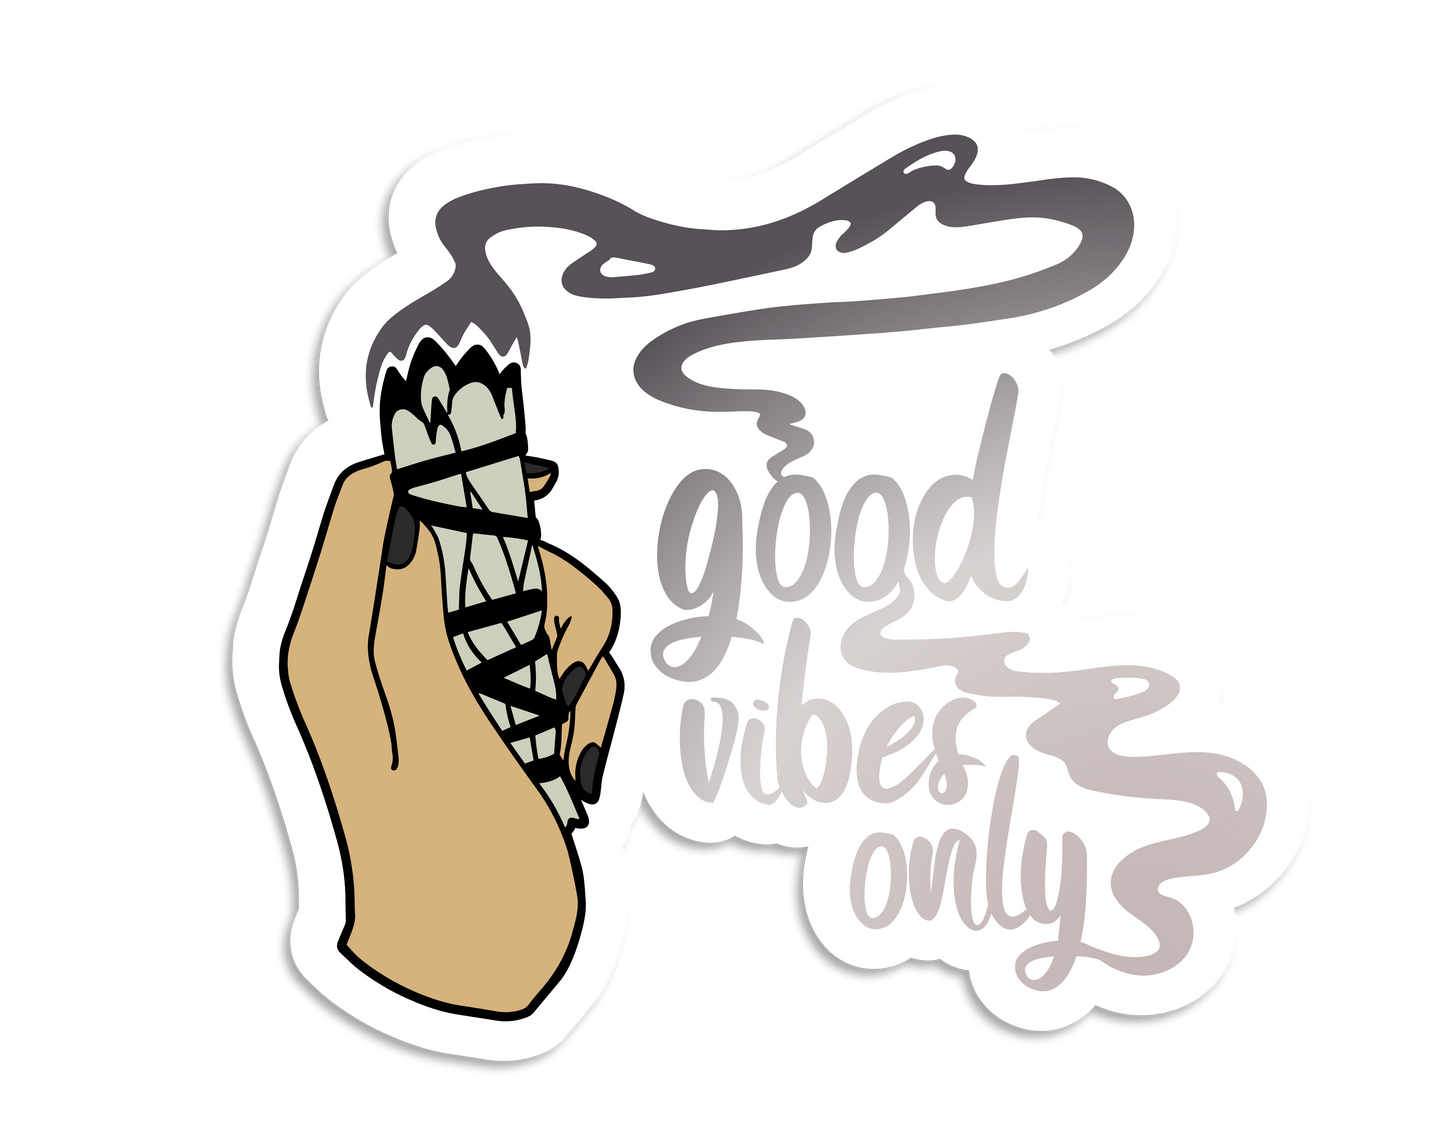 A diecut sticker featuring a picture of a hand holding a sage stick and text reading "Good Vibes Only"